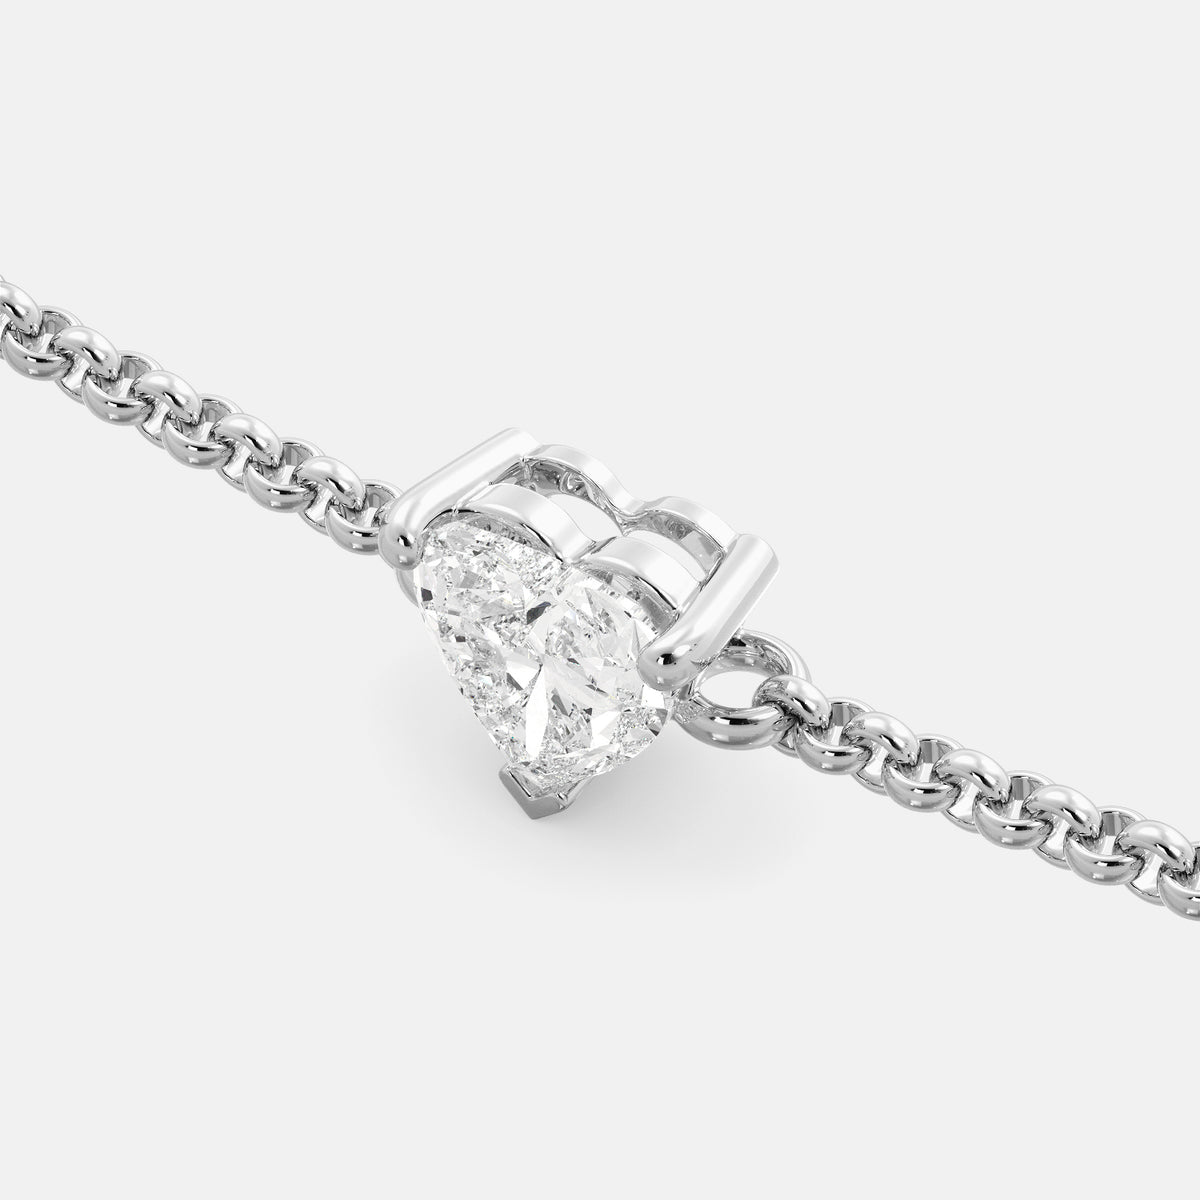 A close-up of a heart-shaped diamond bracelet in recycled white gold. The bracelet is set with a single, large diamond in the center of a heart-shaped pendant. The bracelet is made of recycled white gold and has a simple, elegant design. The diamond is sparkling and reflects light beautifully. The bracelet is a perfect gift for a loved one or a special occasion.